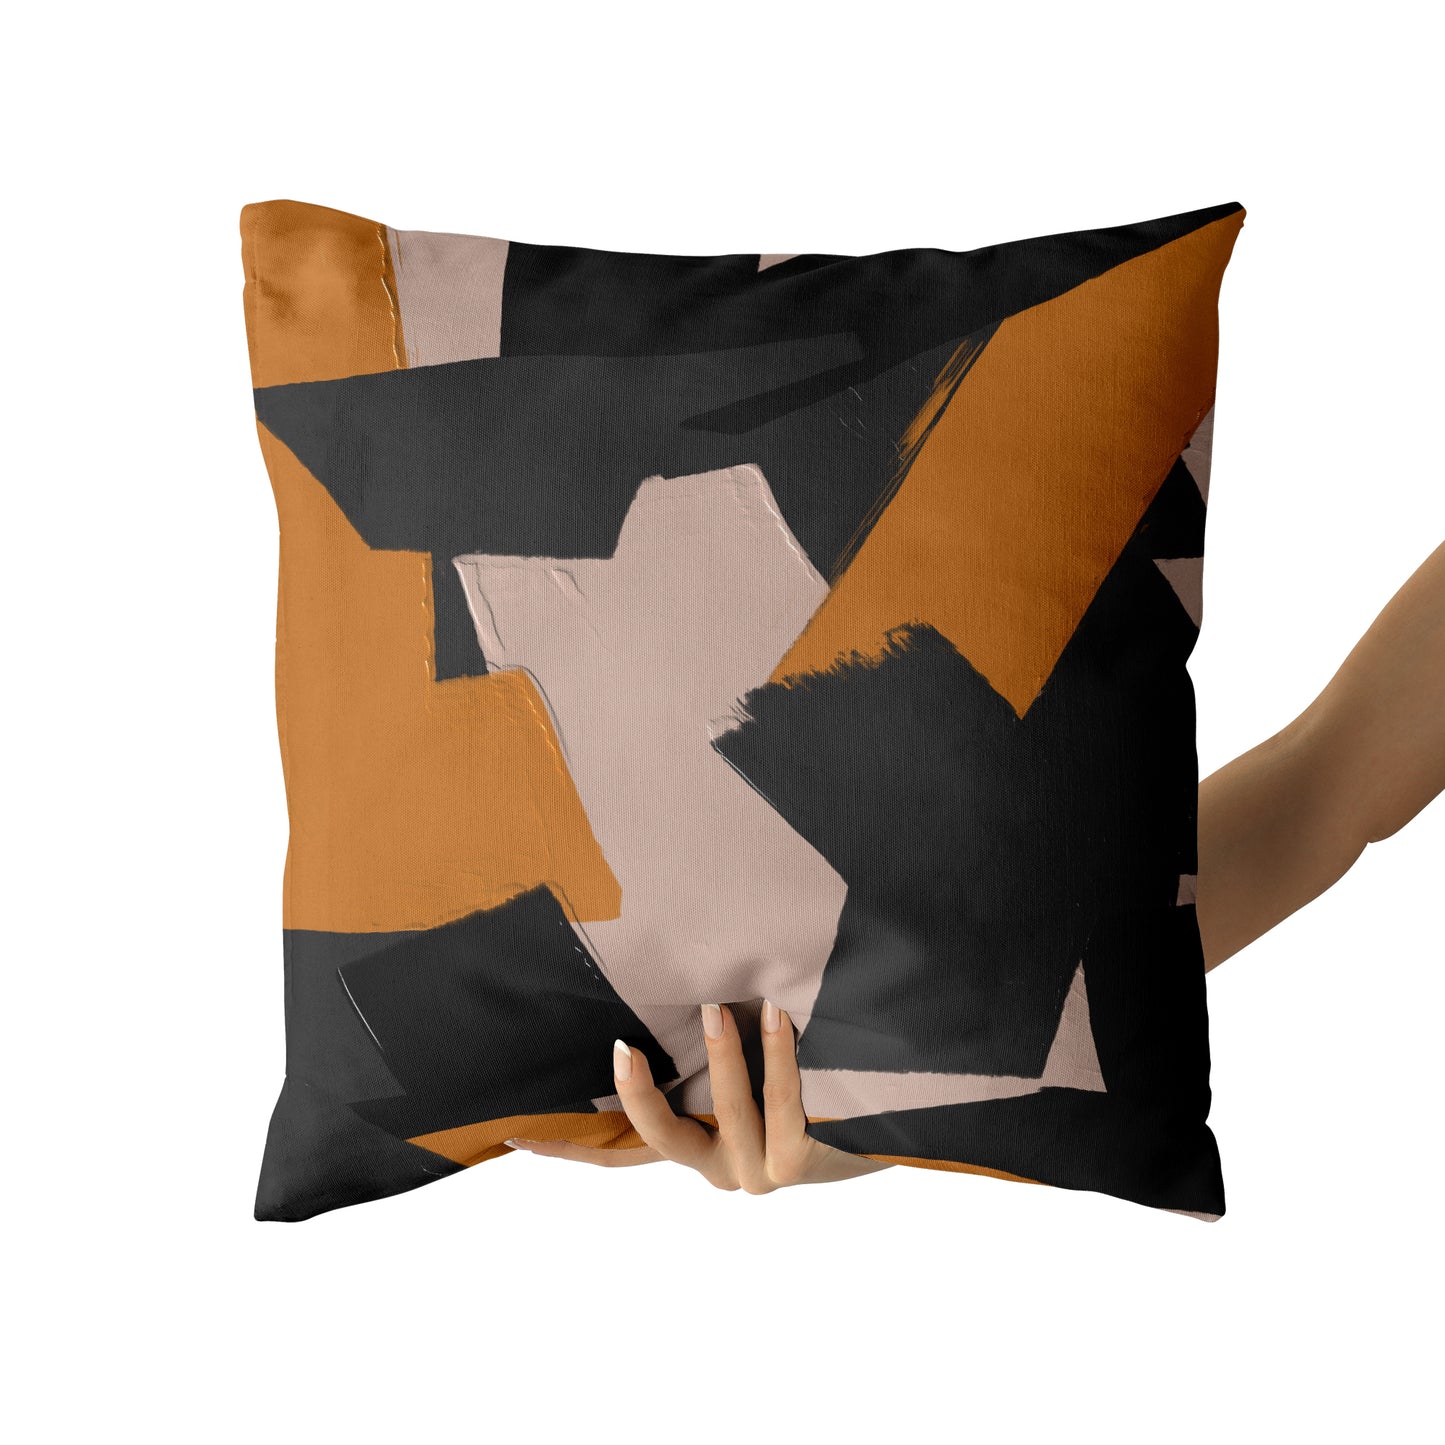 Geometric Abstract Artistic Throw Pillow